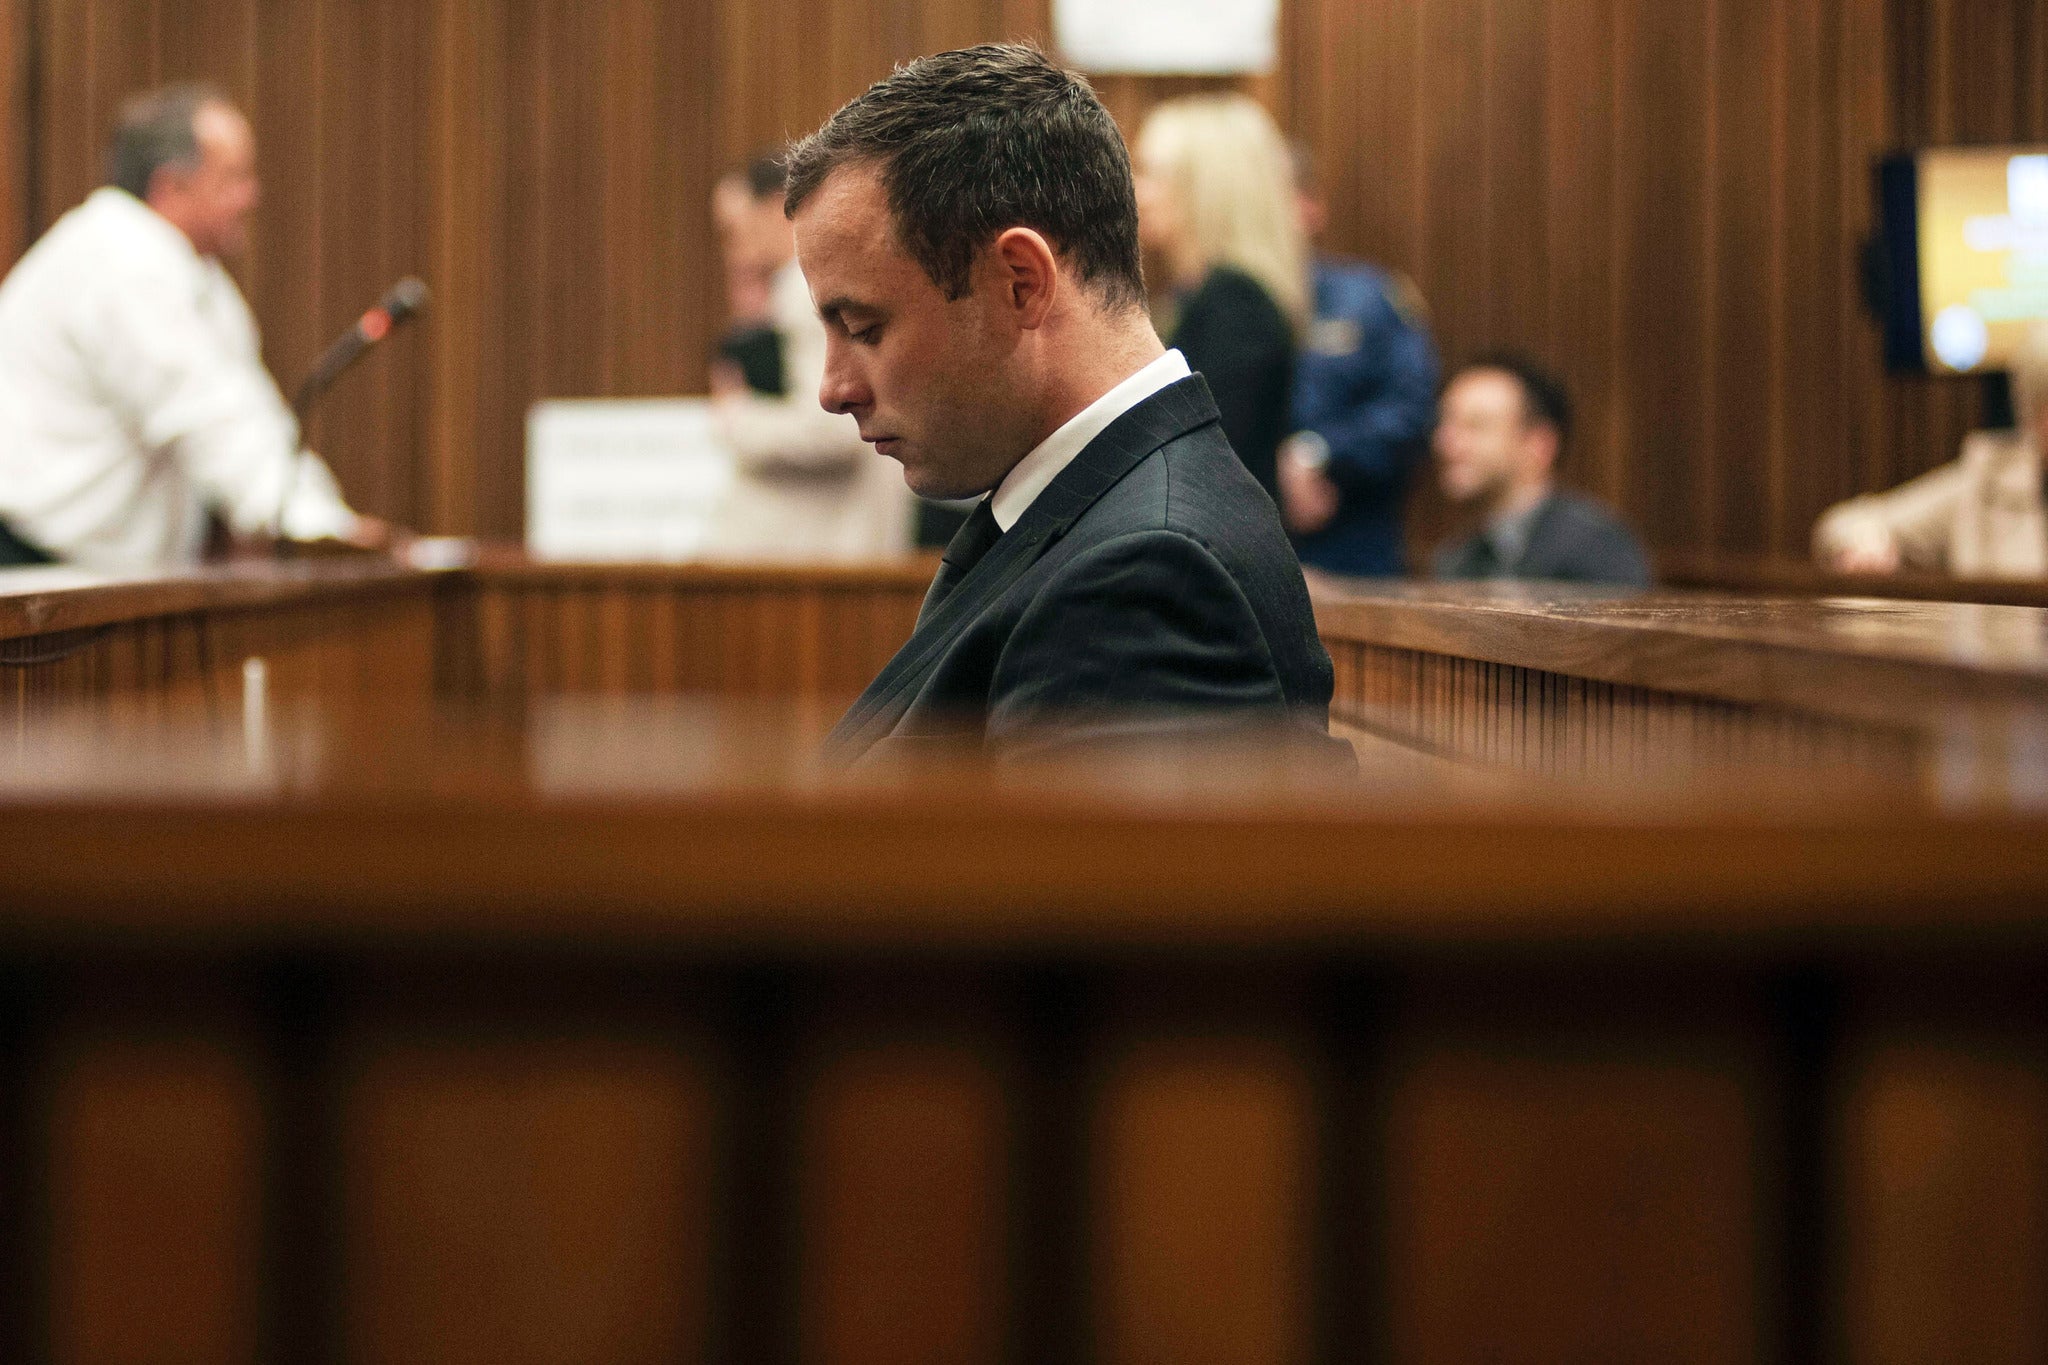 Oscar Pistorius was involved in an altercation in a nightclub on Saturday